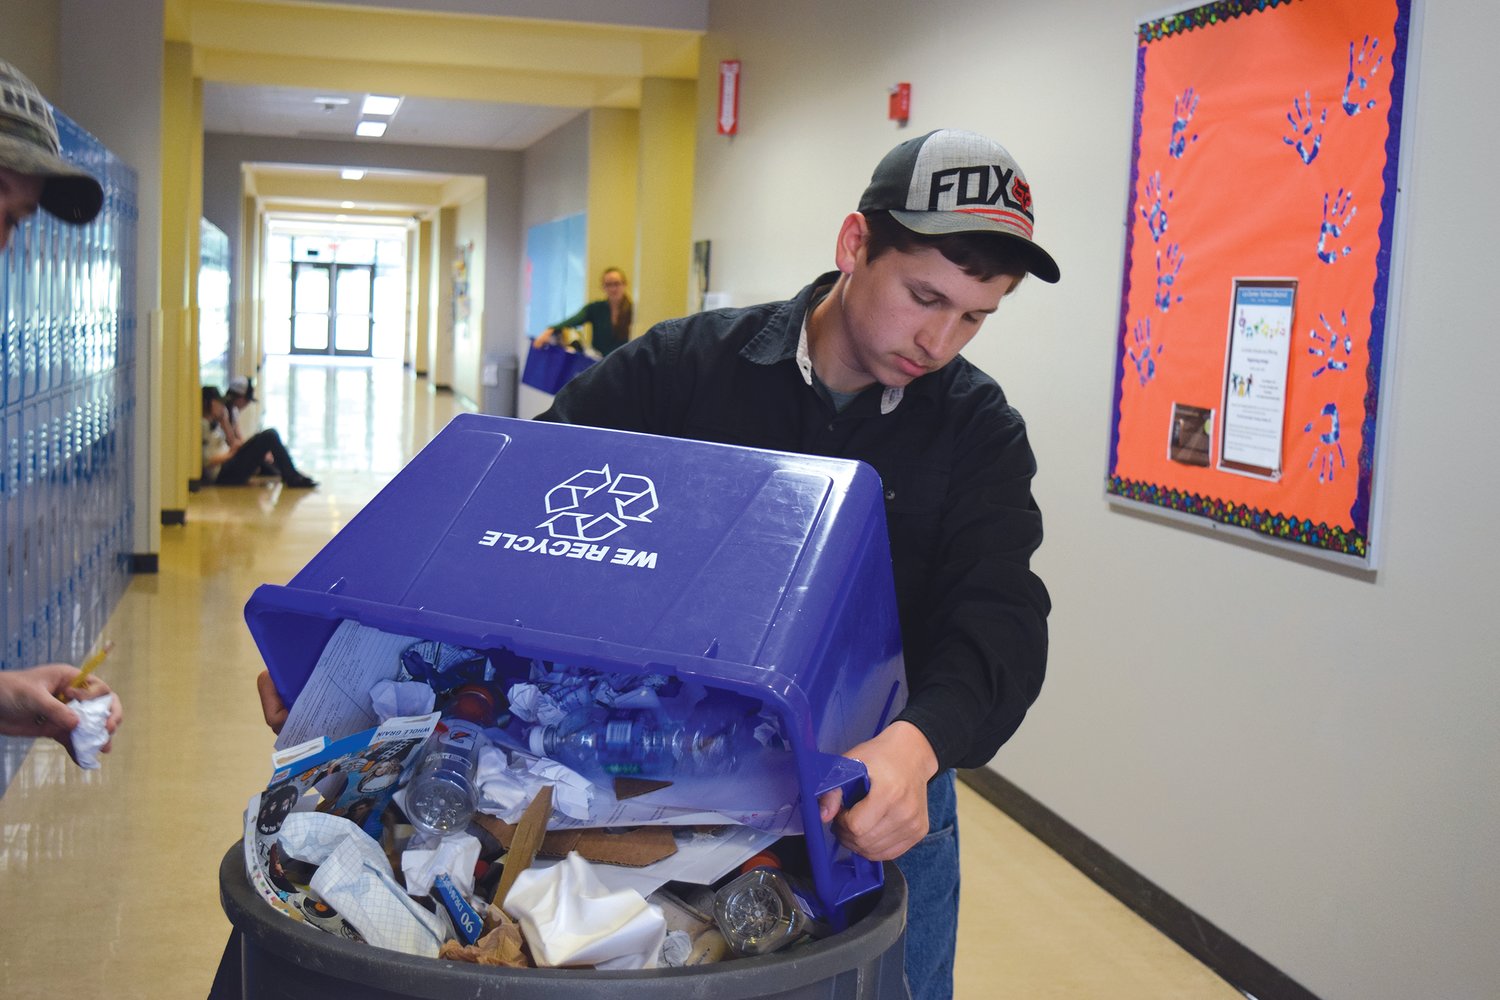 La Center senior Tristan Caywood (above) dumps a recycling bin at the high school. He said the experience of helping make La Center High School recognized as a green school has made him appreciate the environment more.